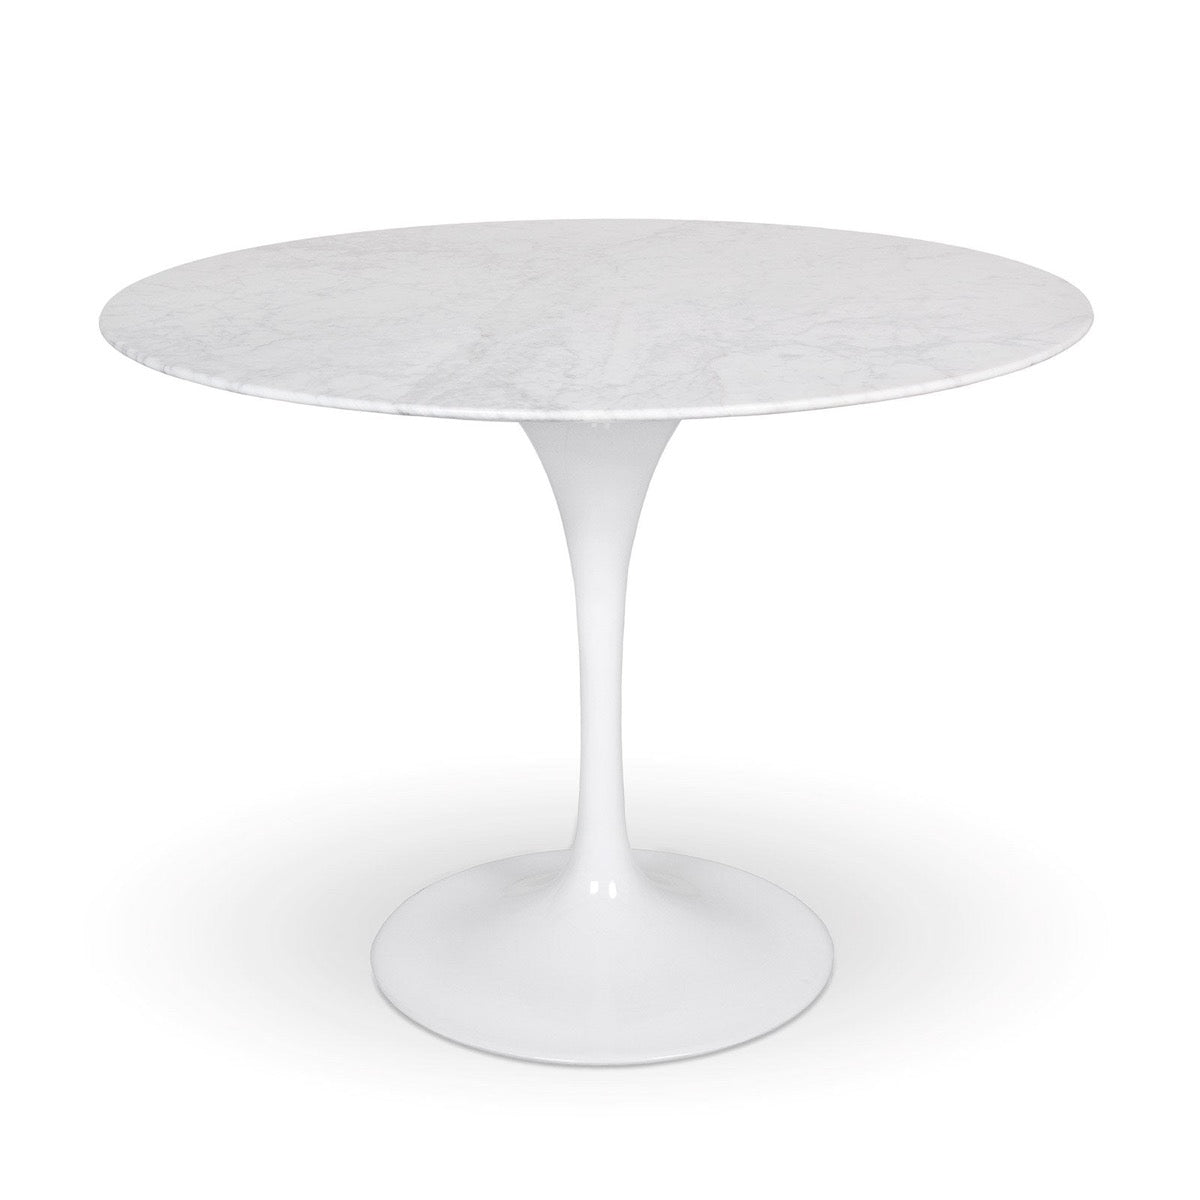 Trumpet Dining Table Round - Condo Size. Front view.